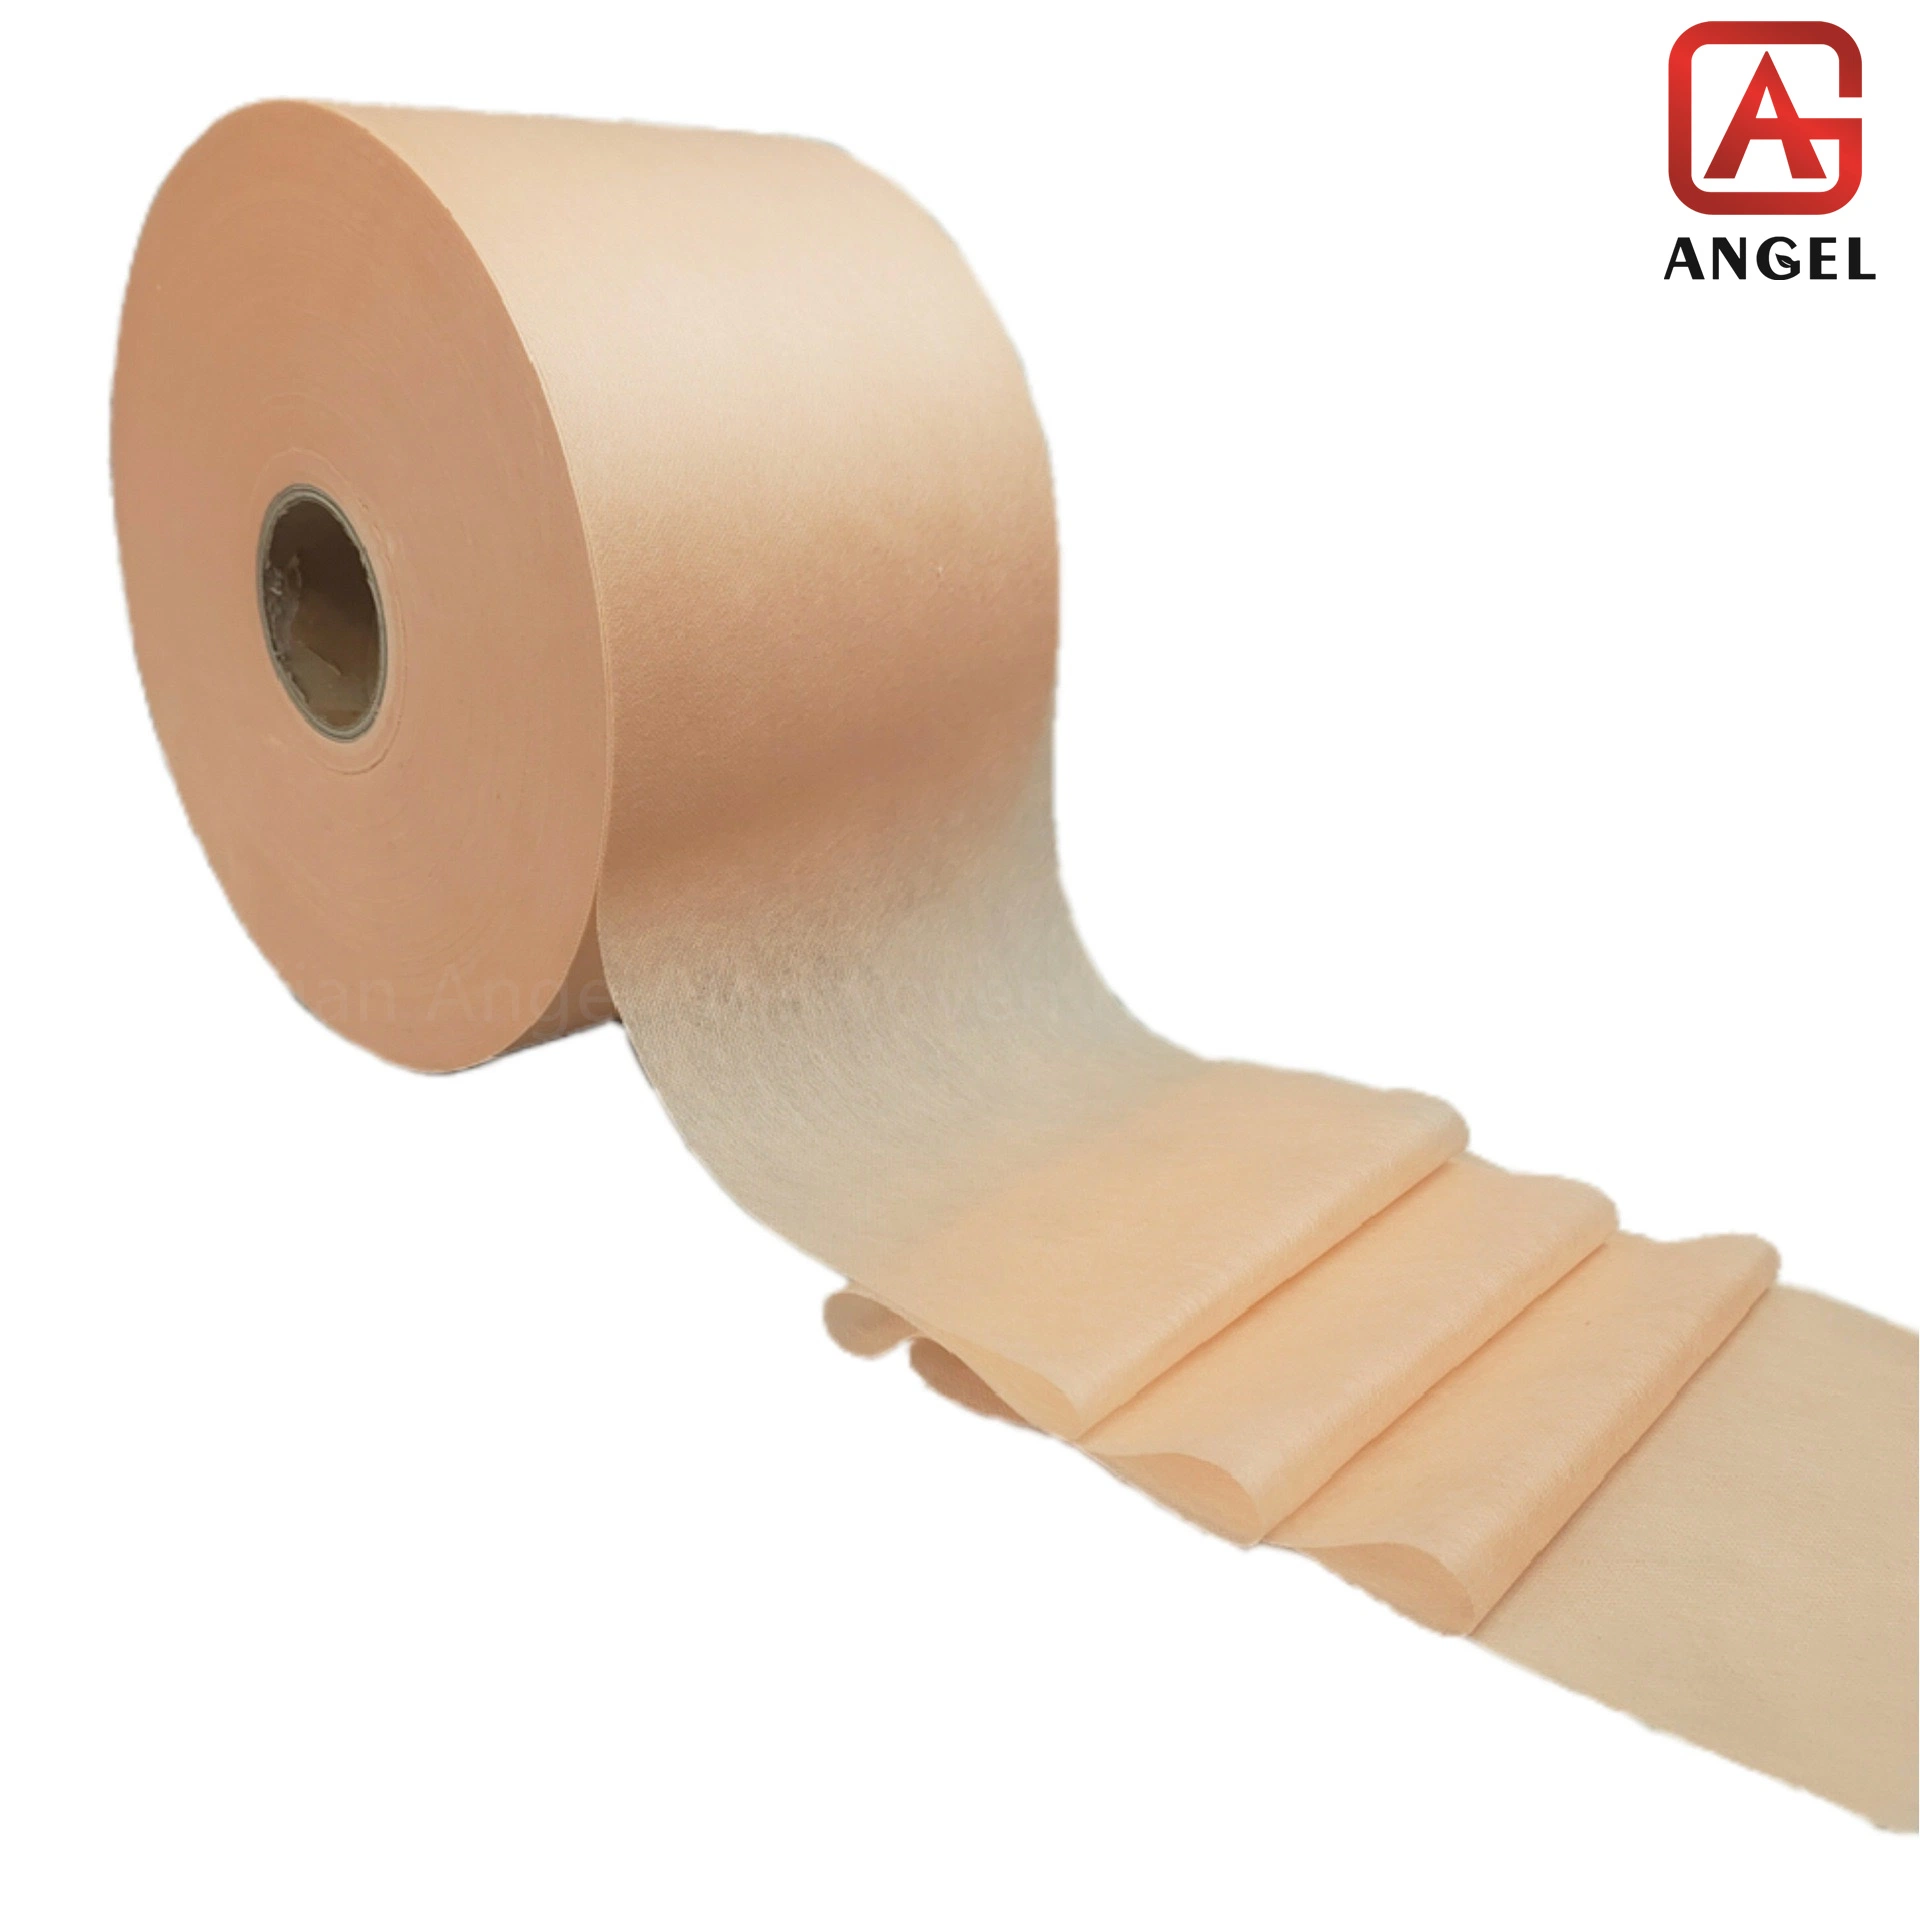 Copper Fabric PP Spunbond Antibacterial 25g/45g Non-Woven Face Mask